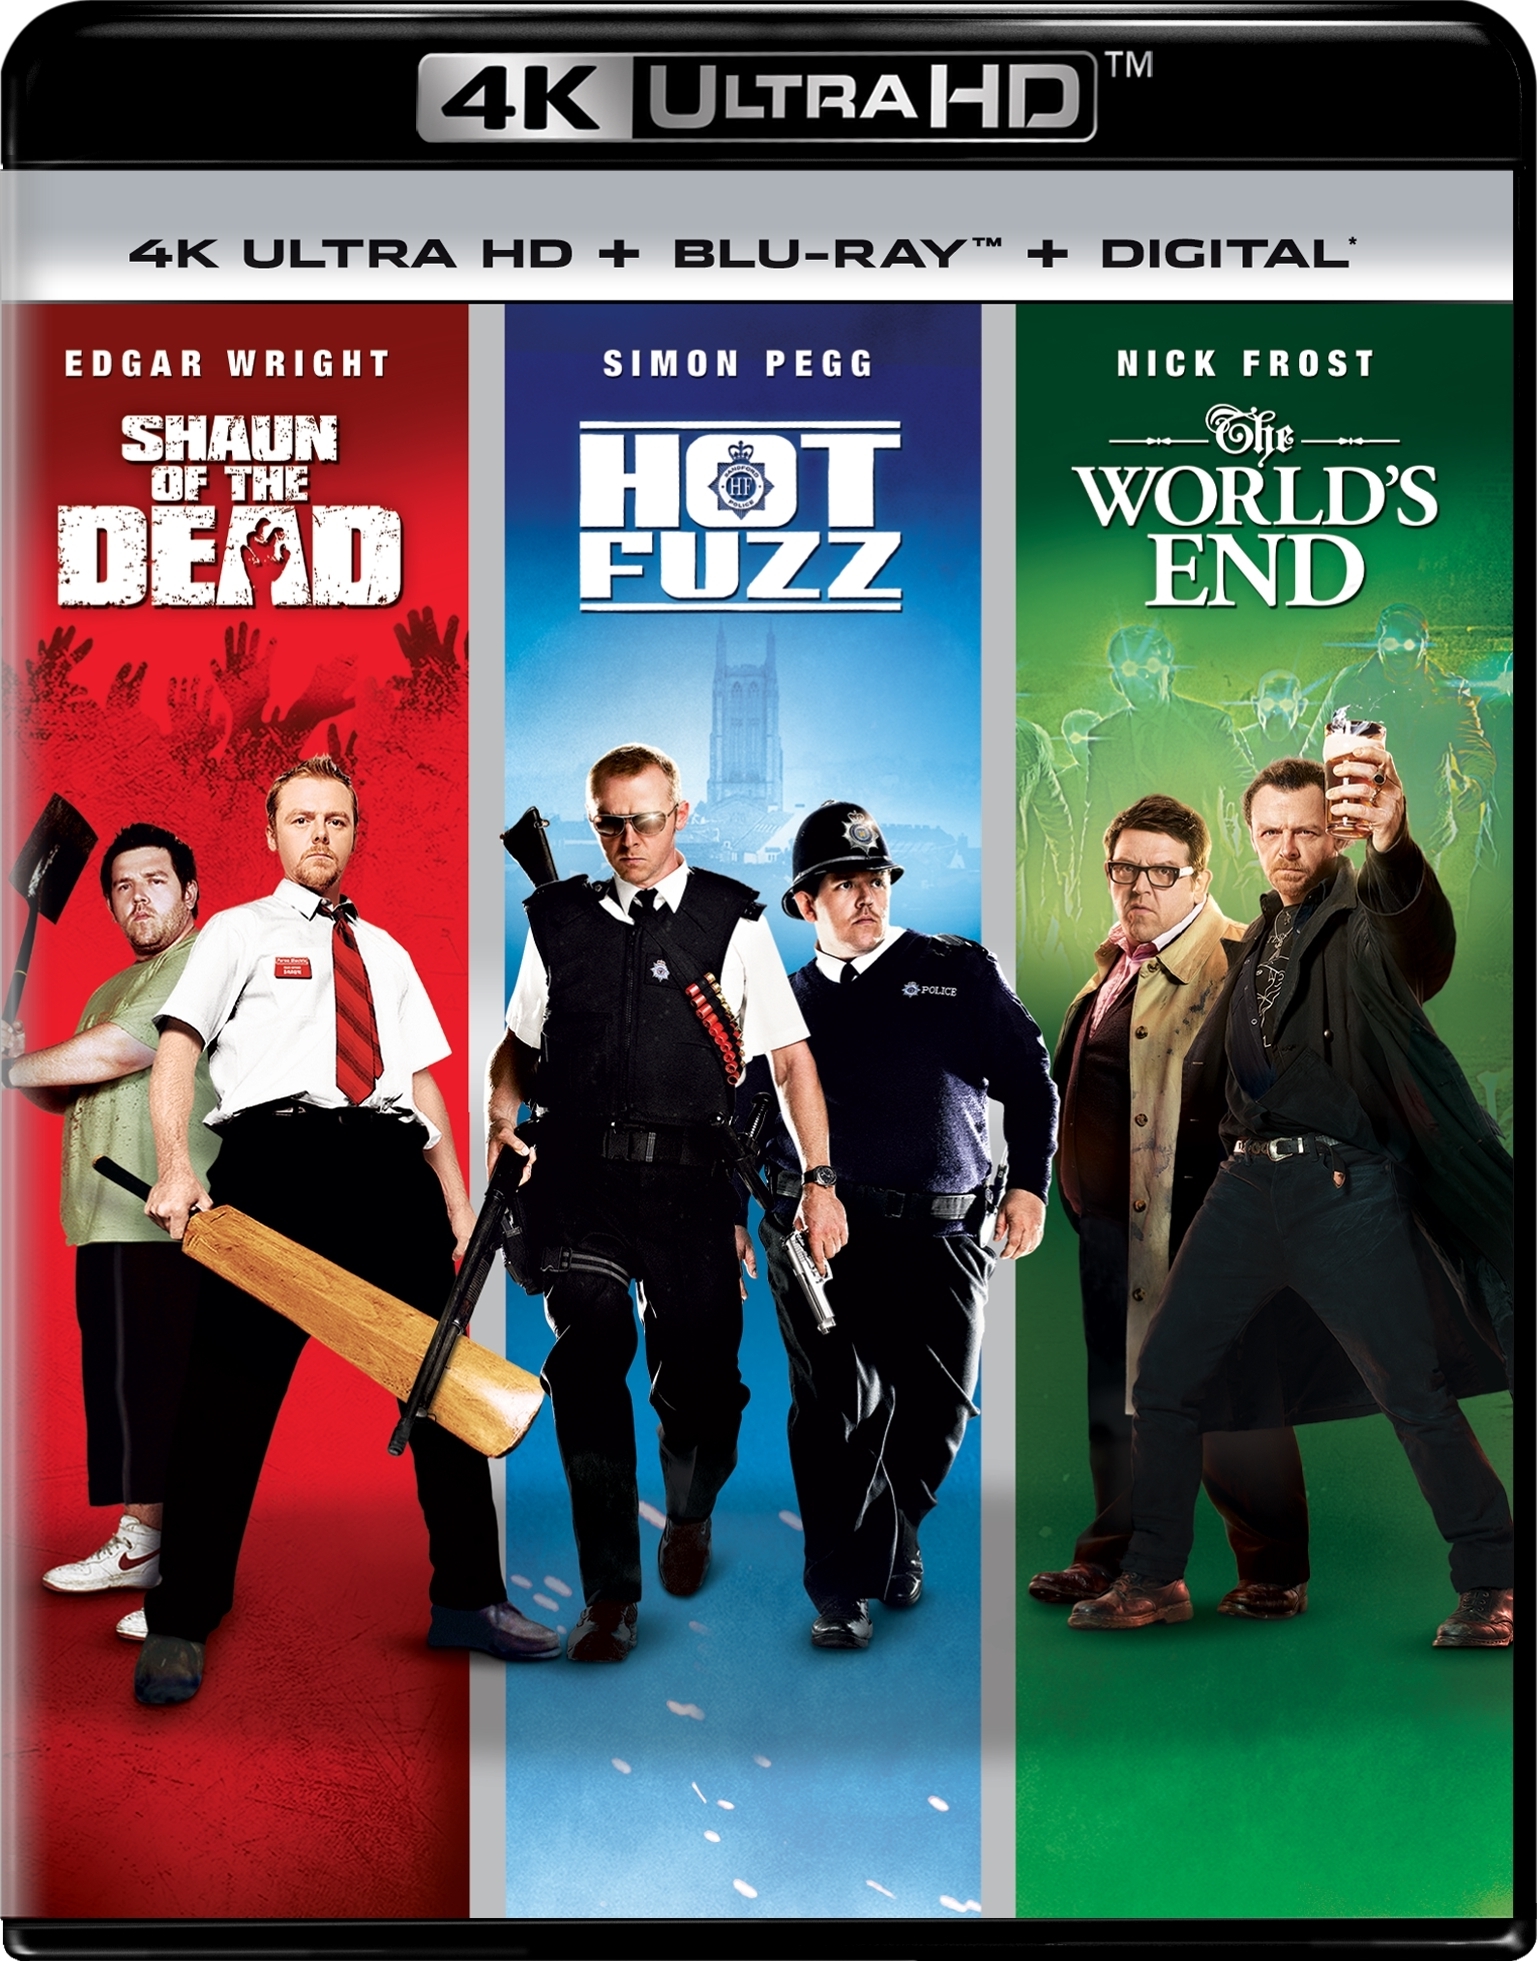 The World's End / Hot Fuzz / Shaun of the Dead Trilogy (4K + Blu-ray + Digital) $19.99